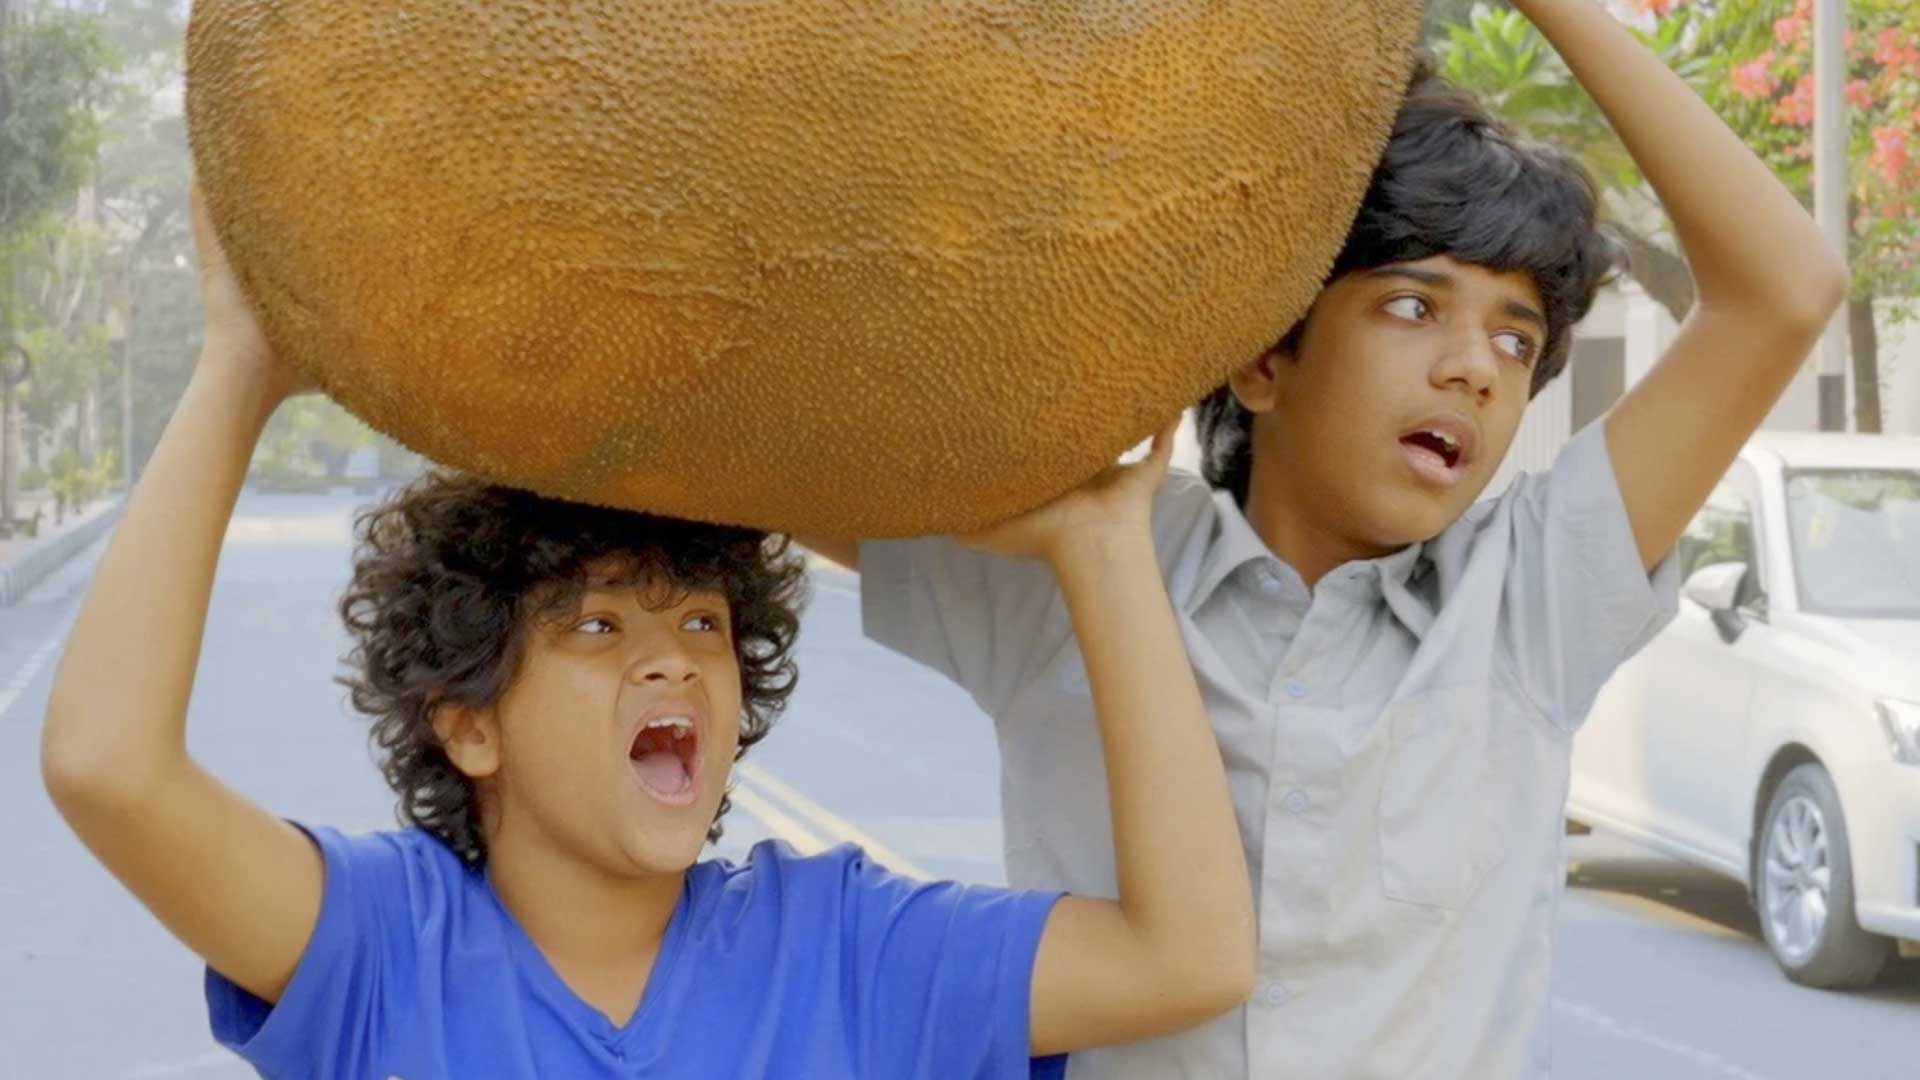 Two young boys in Bangladesh are surprised by something outside of the frame as they carry an enormous jackfruit.